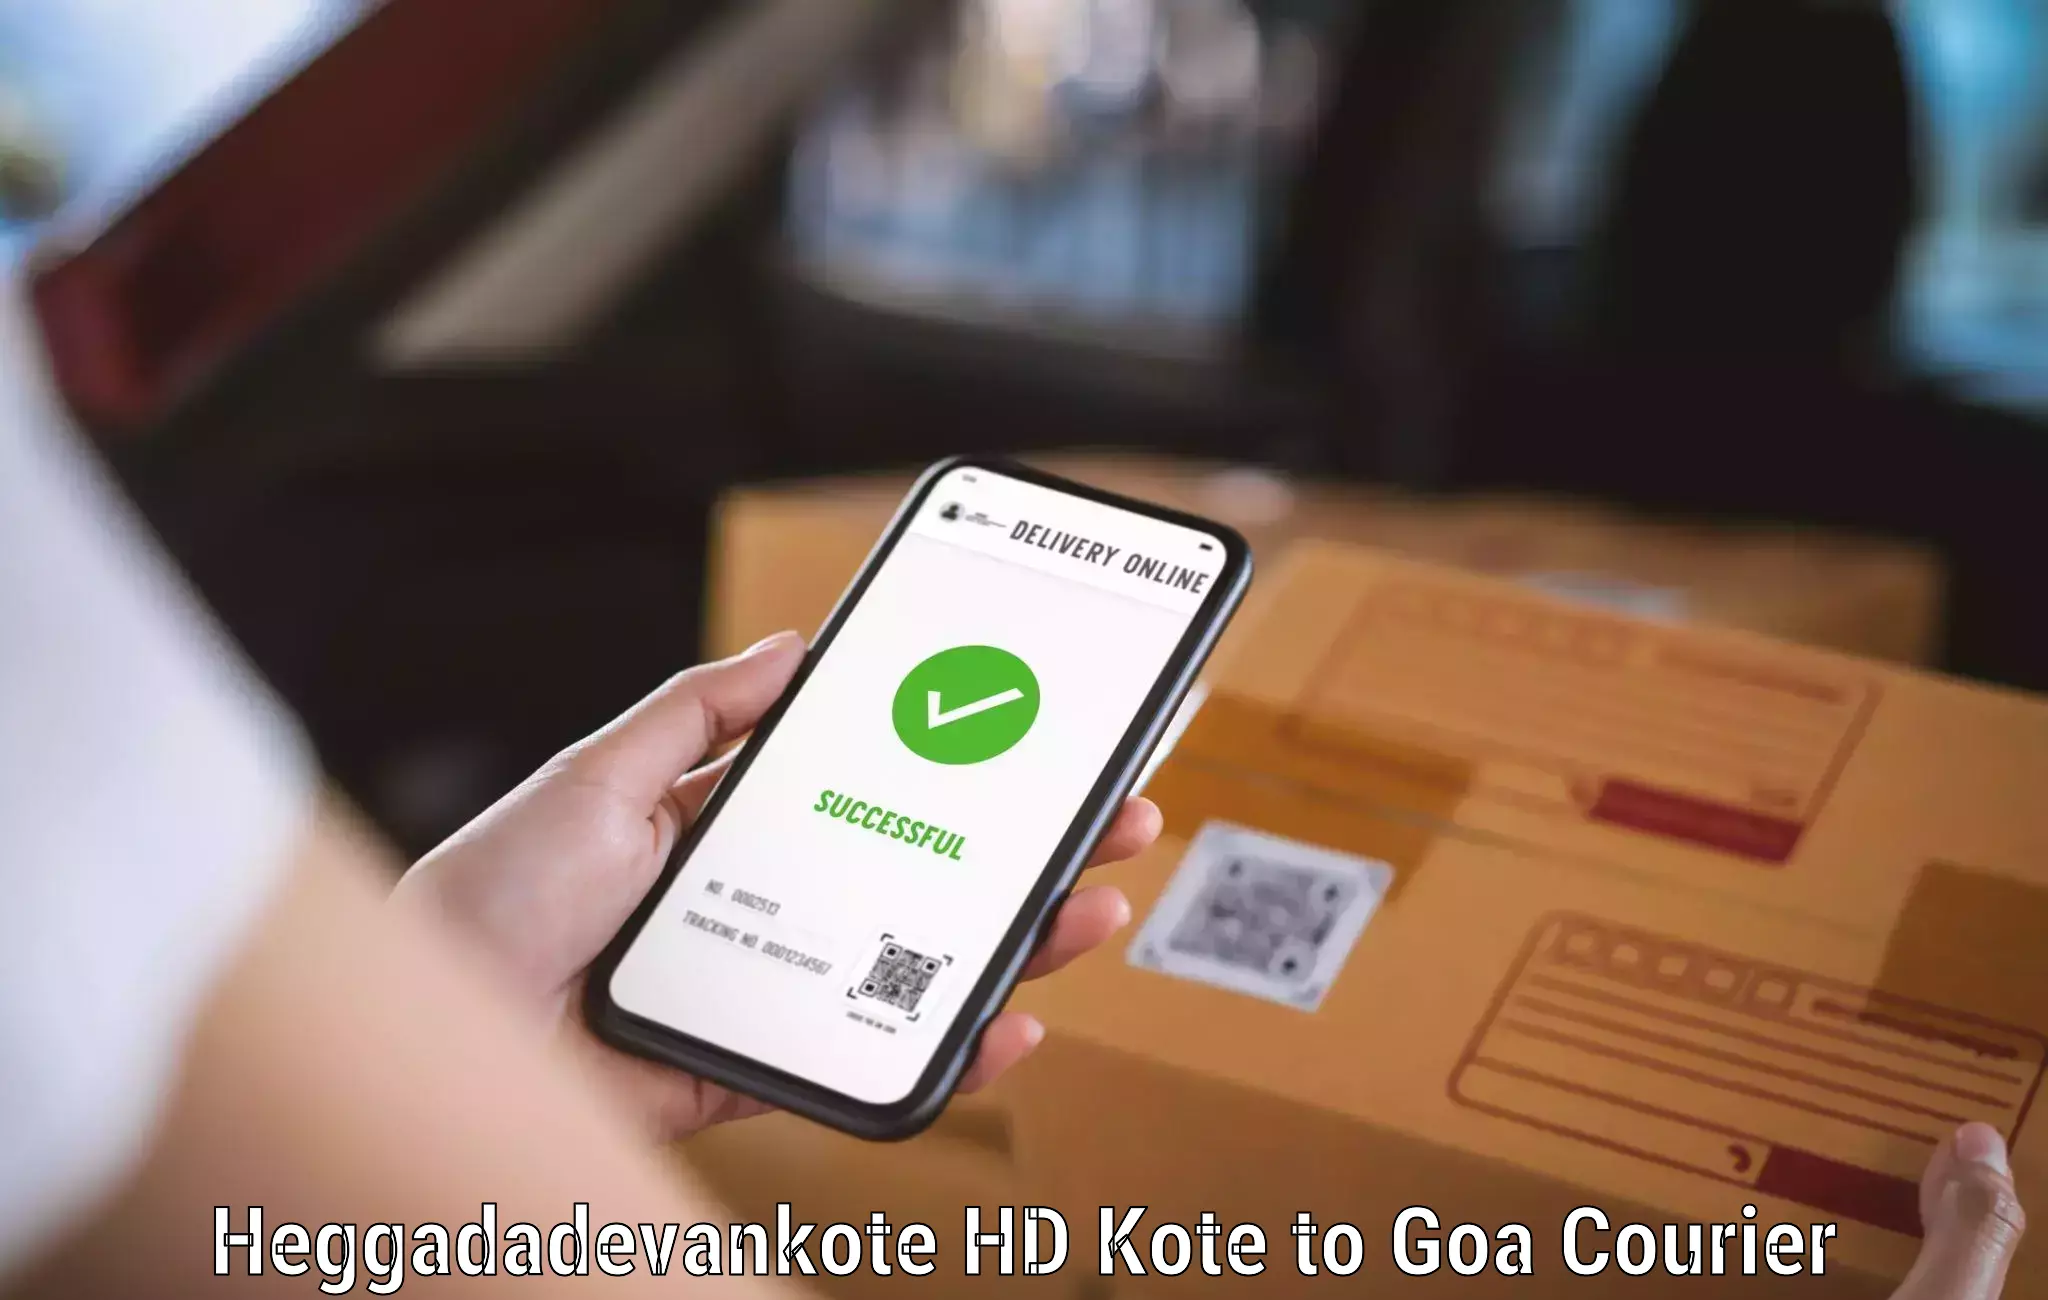 Efficient courier operations Heggadadevankote HD Kote to South Goa